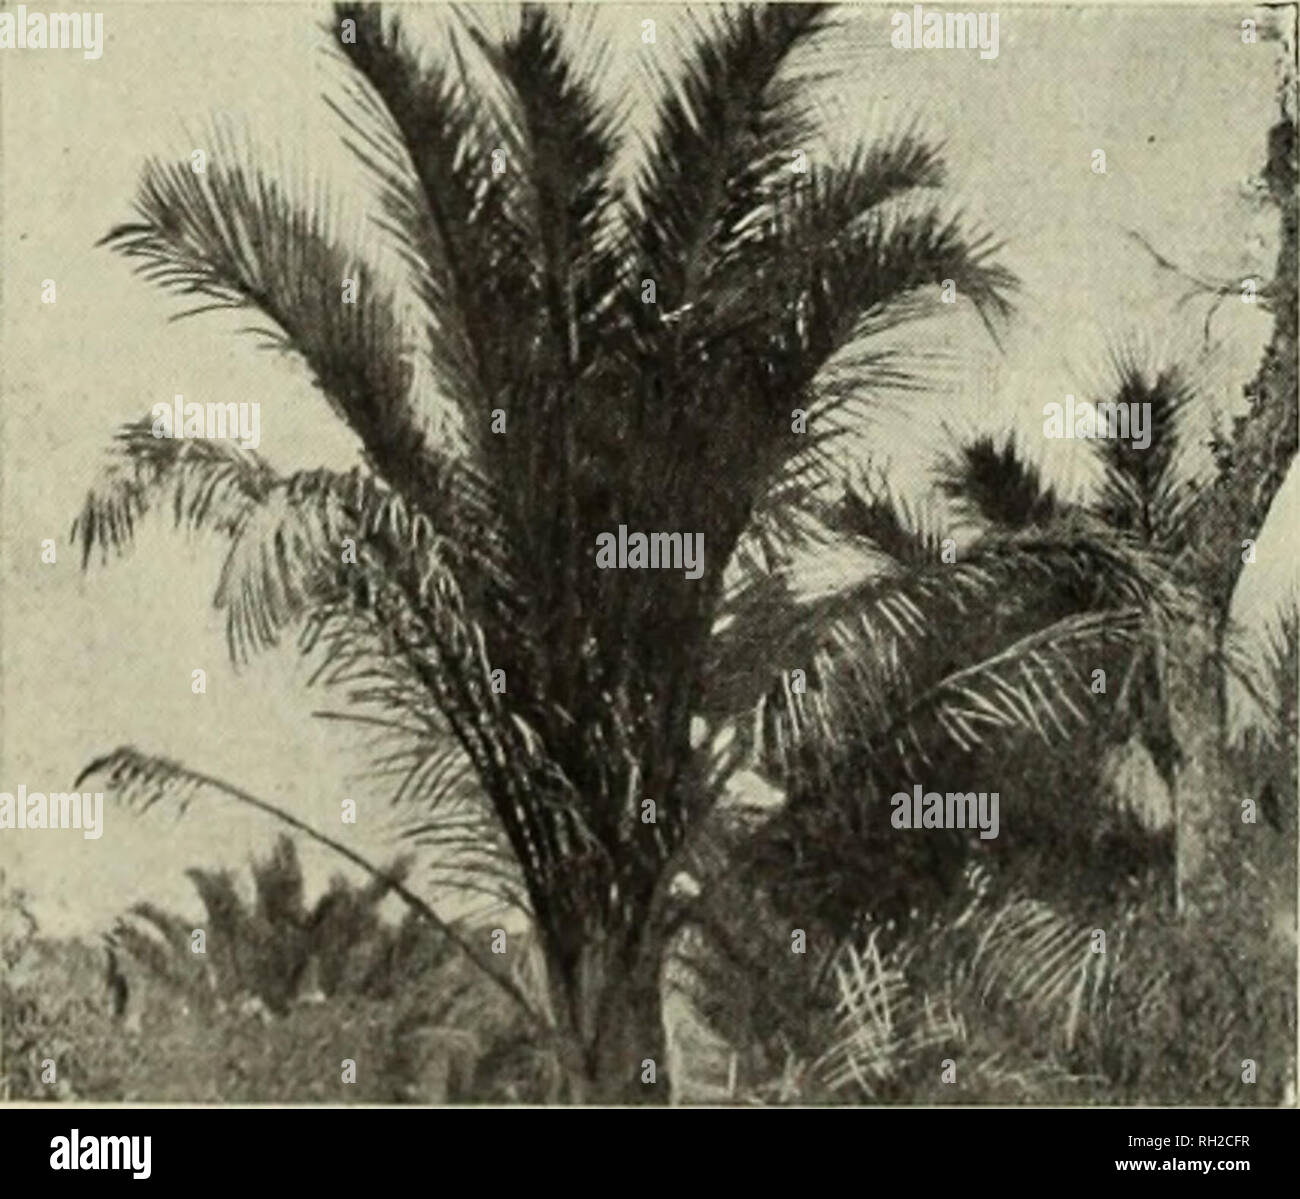 . British Central Africa; an attempt to give some account of a portion of the territories under British influence north of the Zambezi. Natural history. OIL PALMS, NEAR THE SONGWE RIVER, NORTH NYASA Then there are the numerous Coreopses (relations of the Sunflower)—golden- yellow, creamy-white, and blood - red ; pinkish-white anemones; purple iris (Aristed); rosy-tinted, salmon-tinted, apricot - tinted gladioli, or even a gladiolus with huge blossoms of a pale buff colour like cafd-au-lait. There is a great range in the colour of these gladioli. One has a flower of purplish- green. The Hyperic Stock Photo